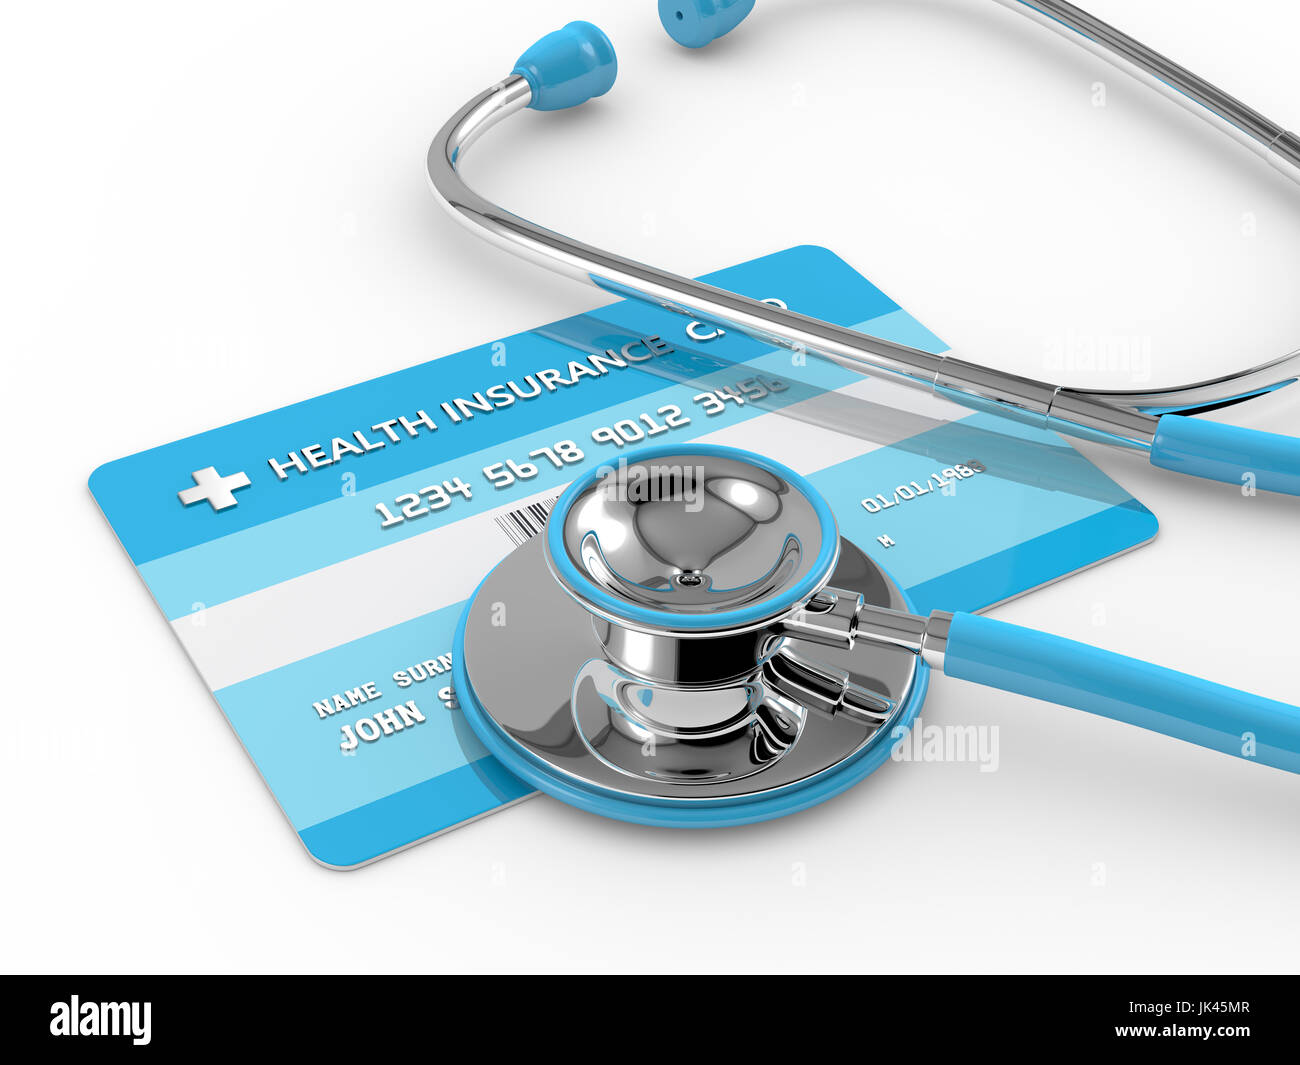 3d render of health insurance card with stethoscope. All personal data is fictitious. Stock Photo